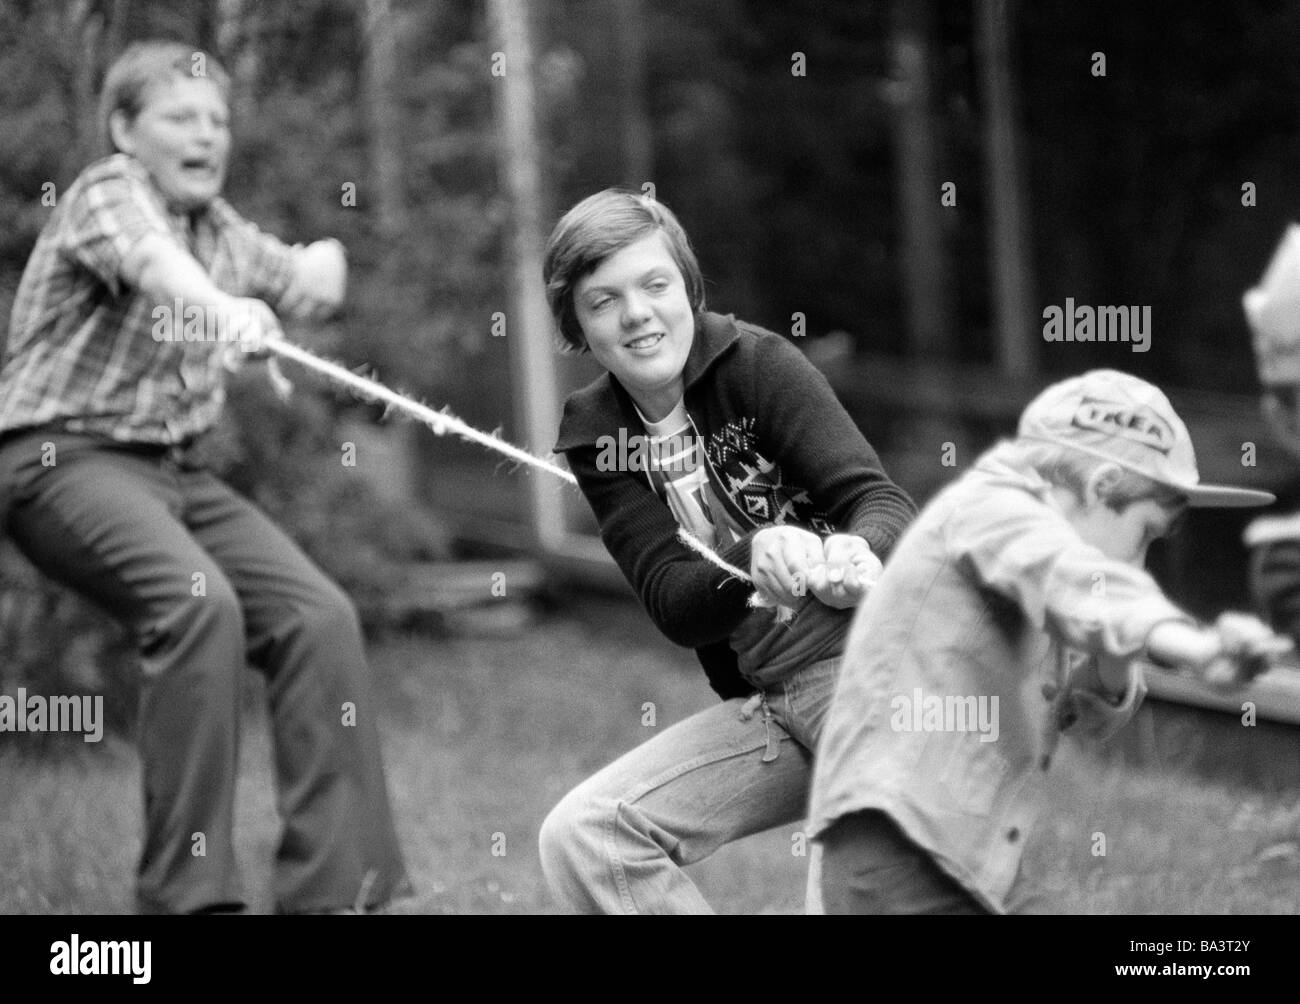 Seventies, black and white photo, people, children, boys, tug-of-war, childrens playground, aged 10 to 13 years Stock Photo